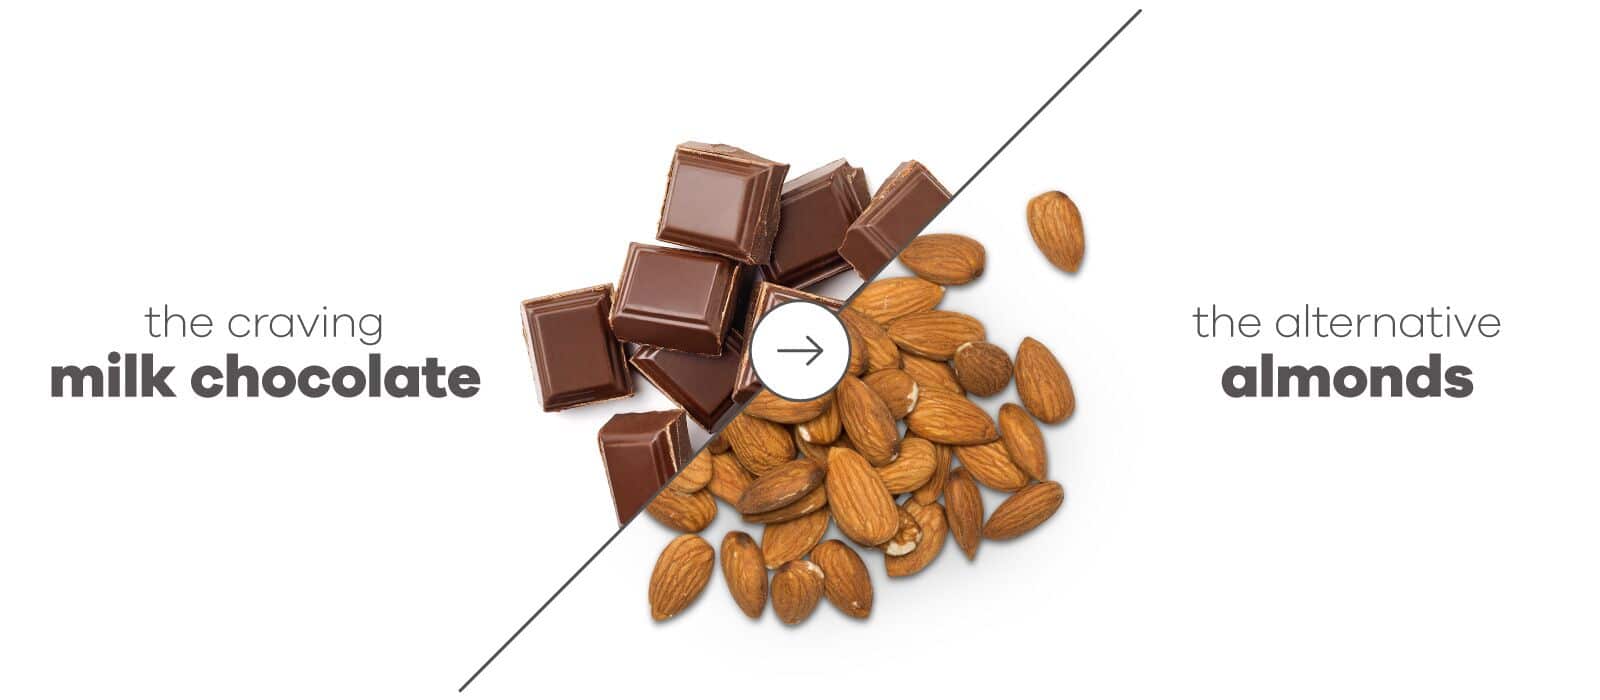 paleo craving substitute, Image of milk chocolate squares with an arrow to a pile of almonds